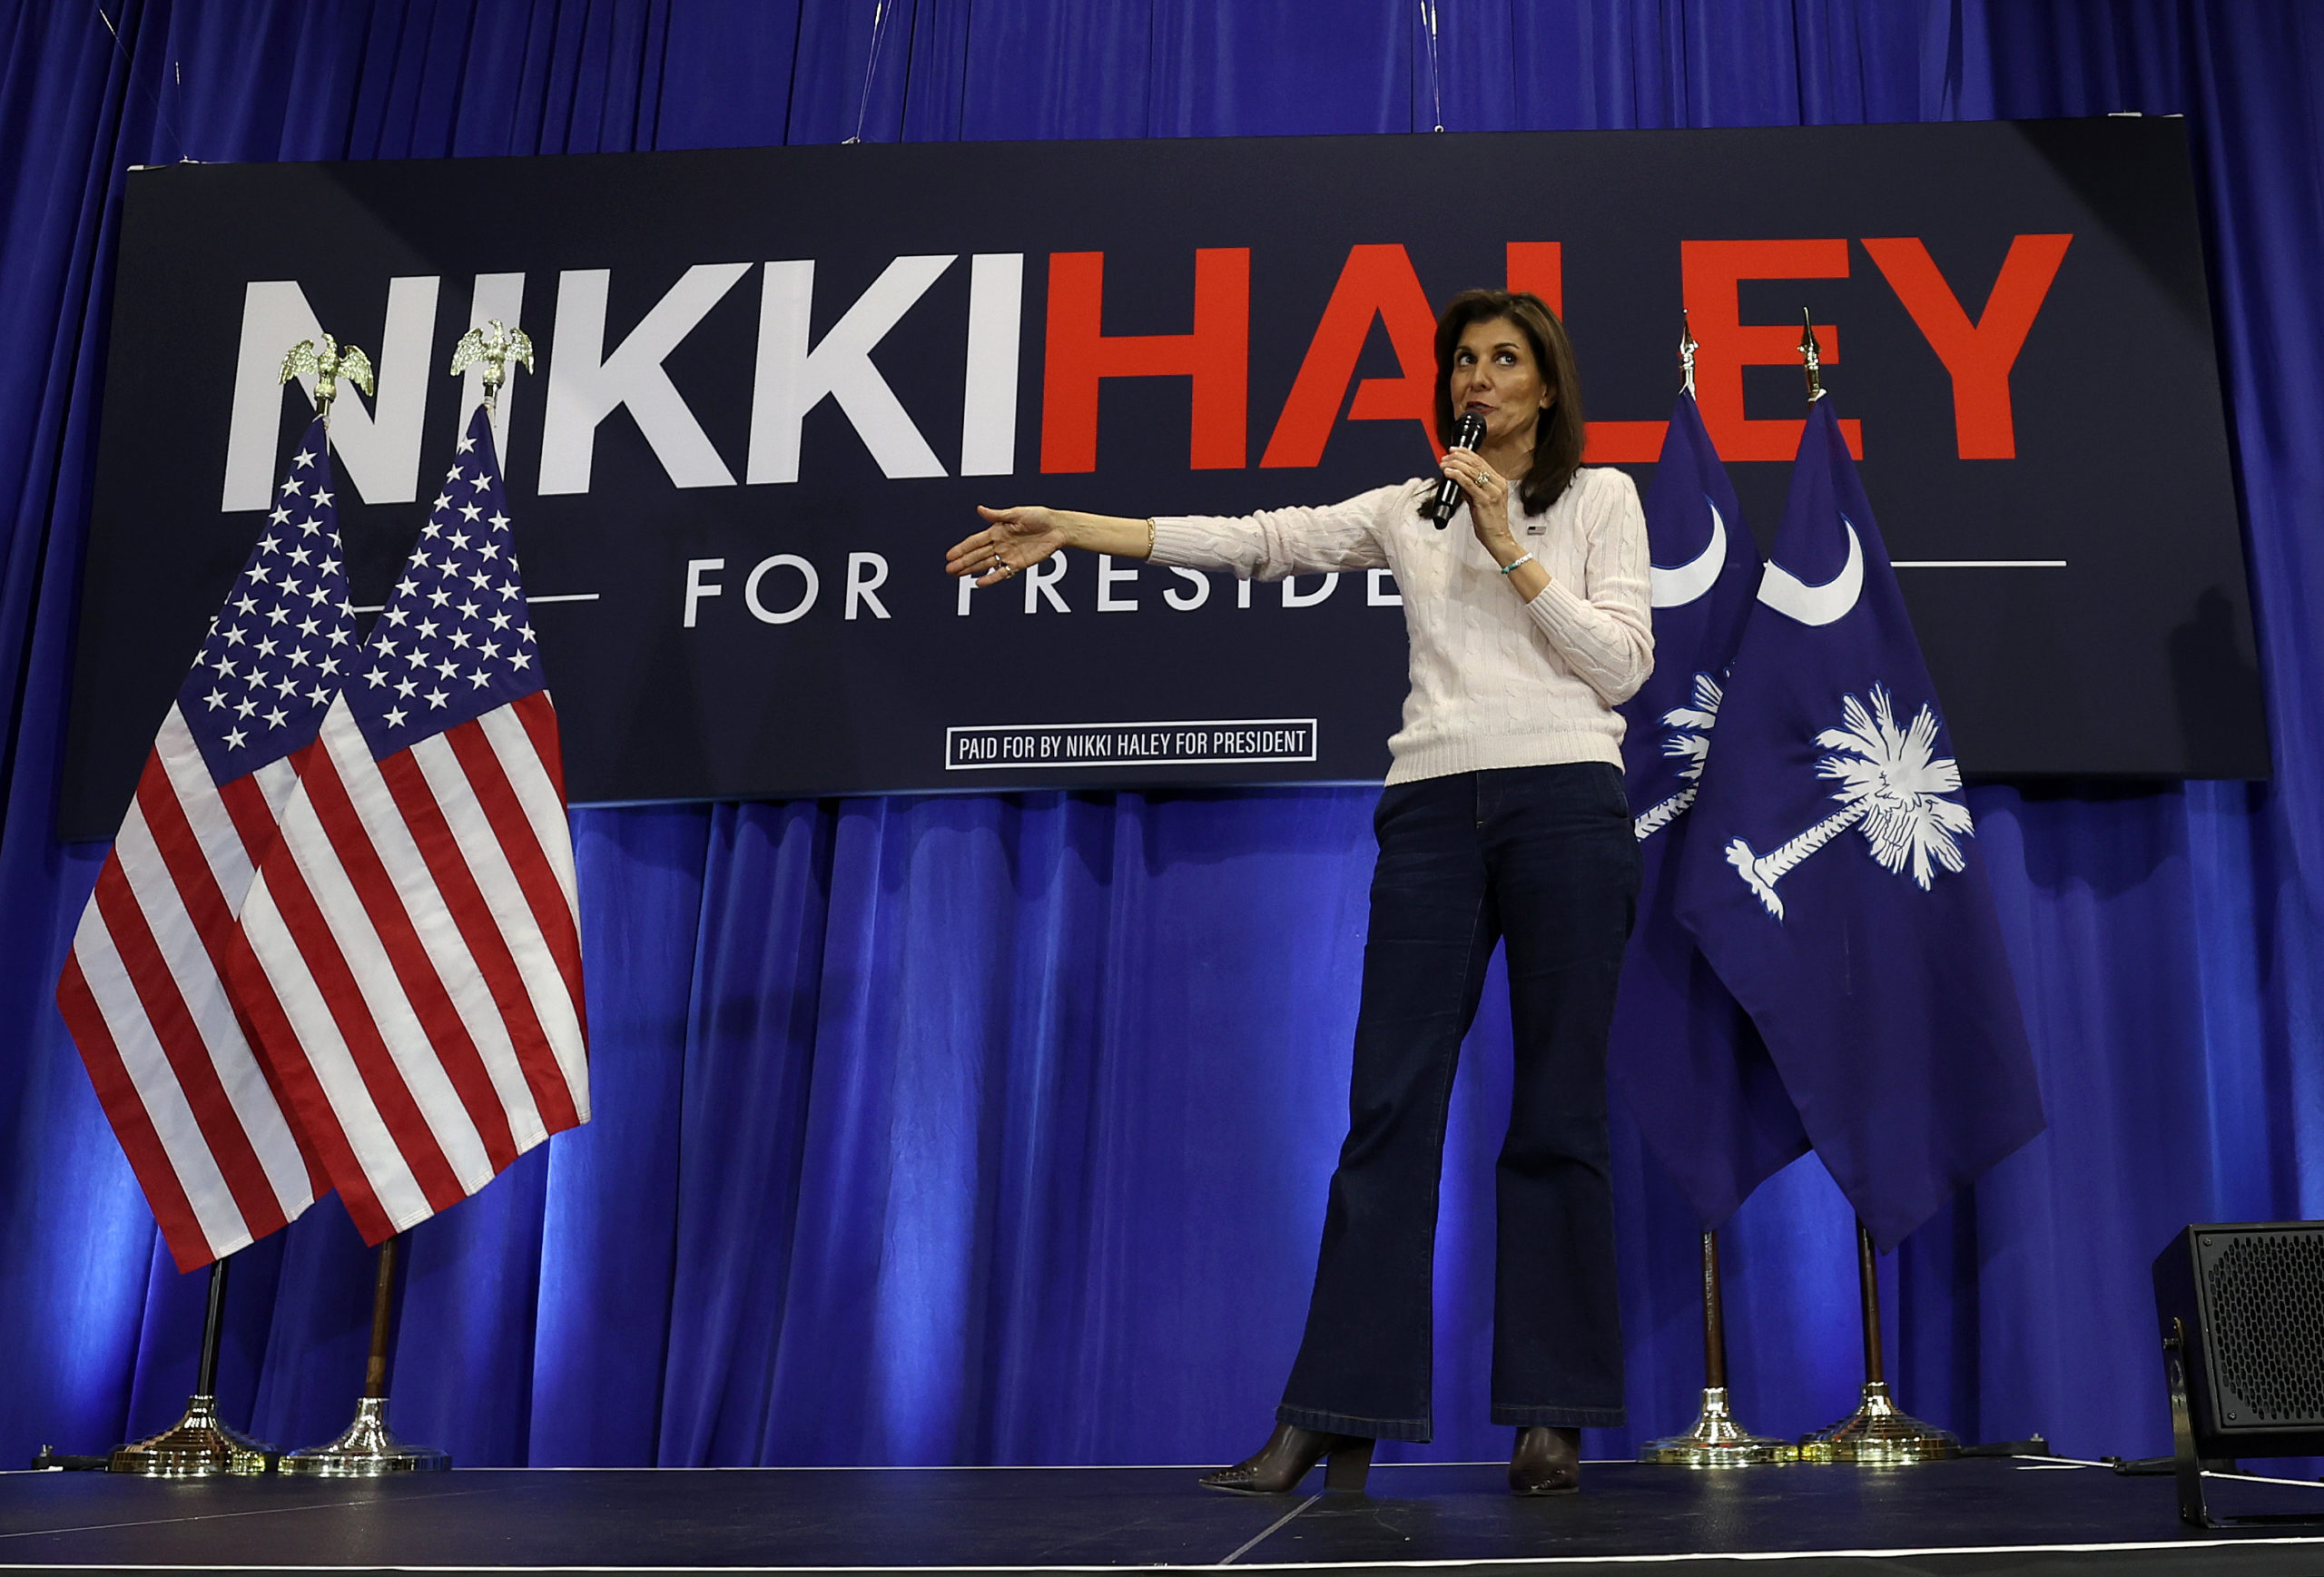 GREER, SOUTH CAROLINA - FEBRUARY 19: Republican presidential candidate former U.N. Ambassador Nikki Haley speaks during a campaign event at the Cannon Centre on February 19, 2024 in Greer, South Carolina. South Carolina. South Carolina holds its Republican primary on February 24. (Photo by Justin Sullivan/Getty Images)